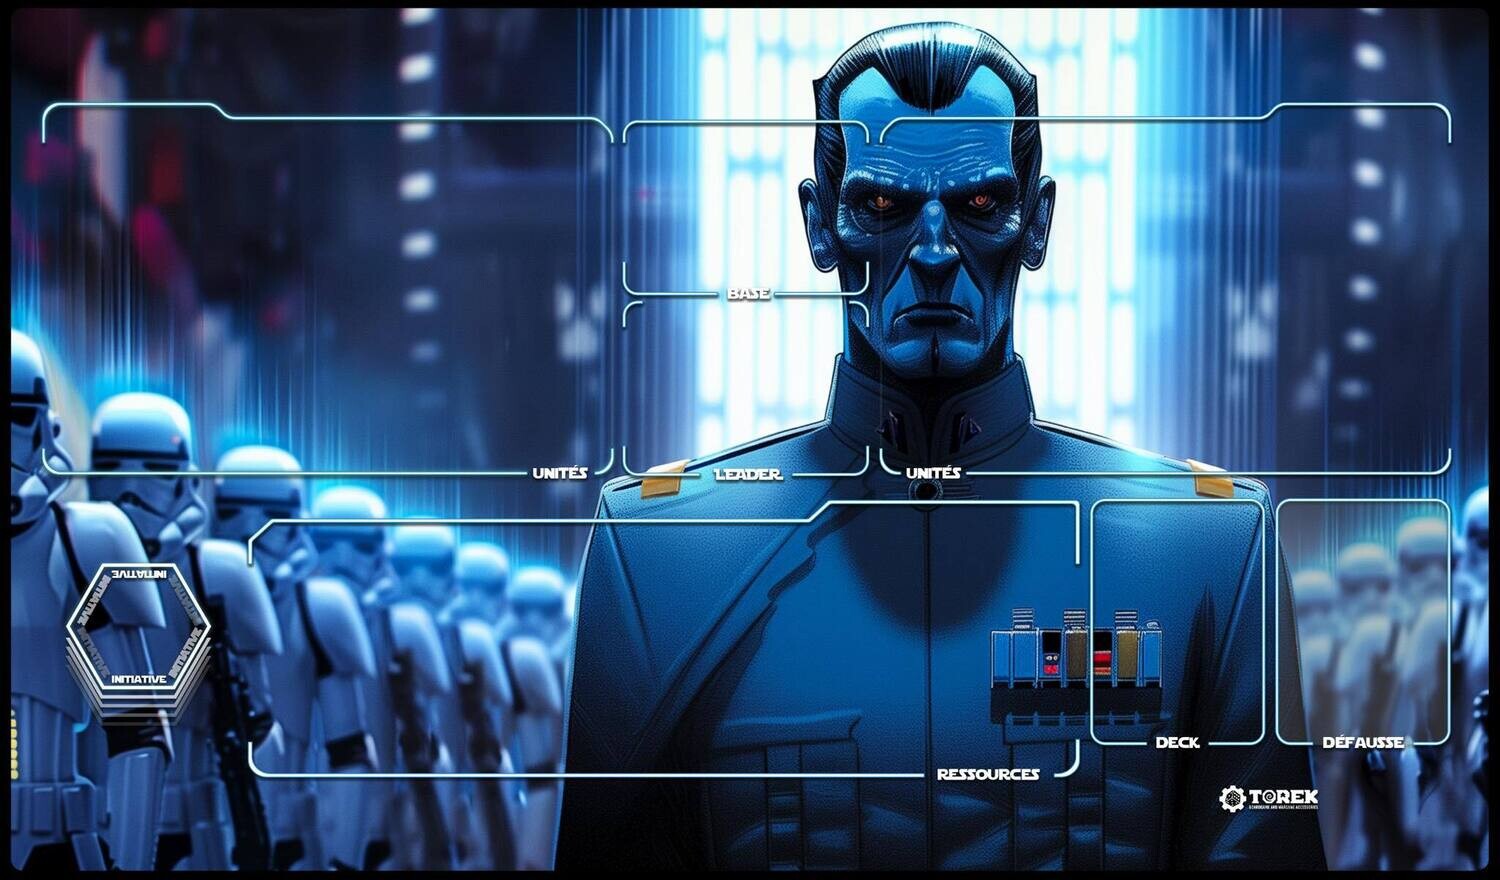 Playmat inspired by Amiral Thrawn - Star Wars unlimited compatible 1 player